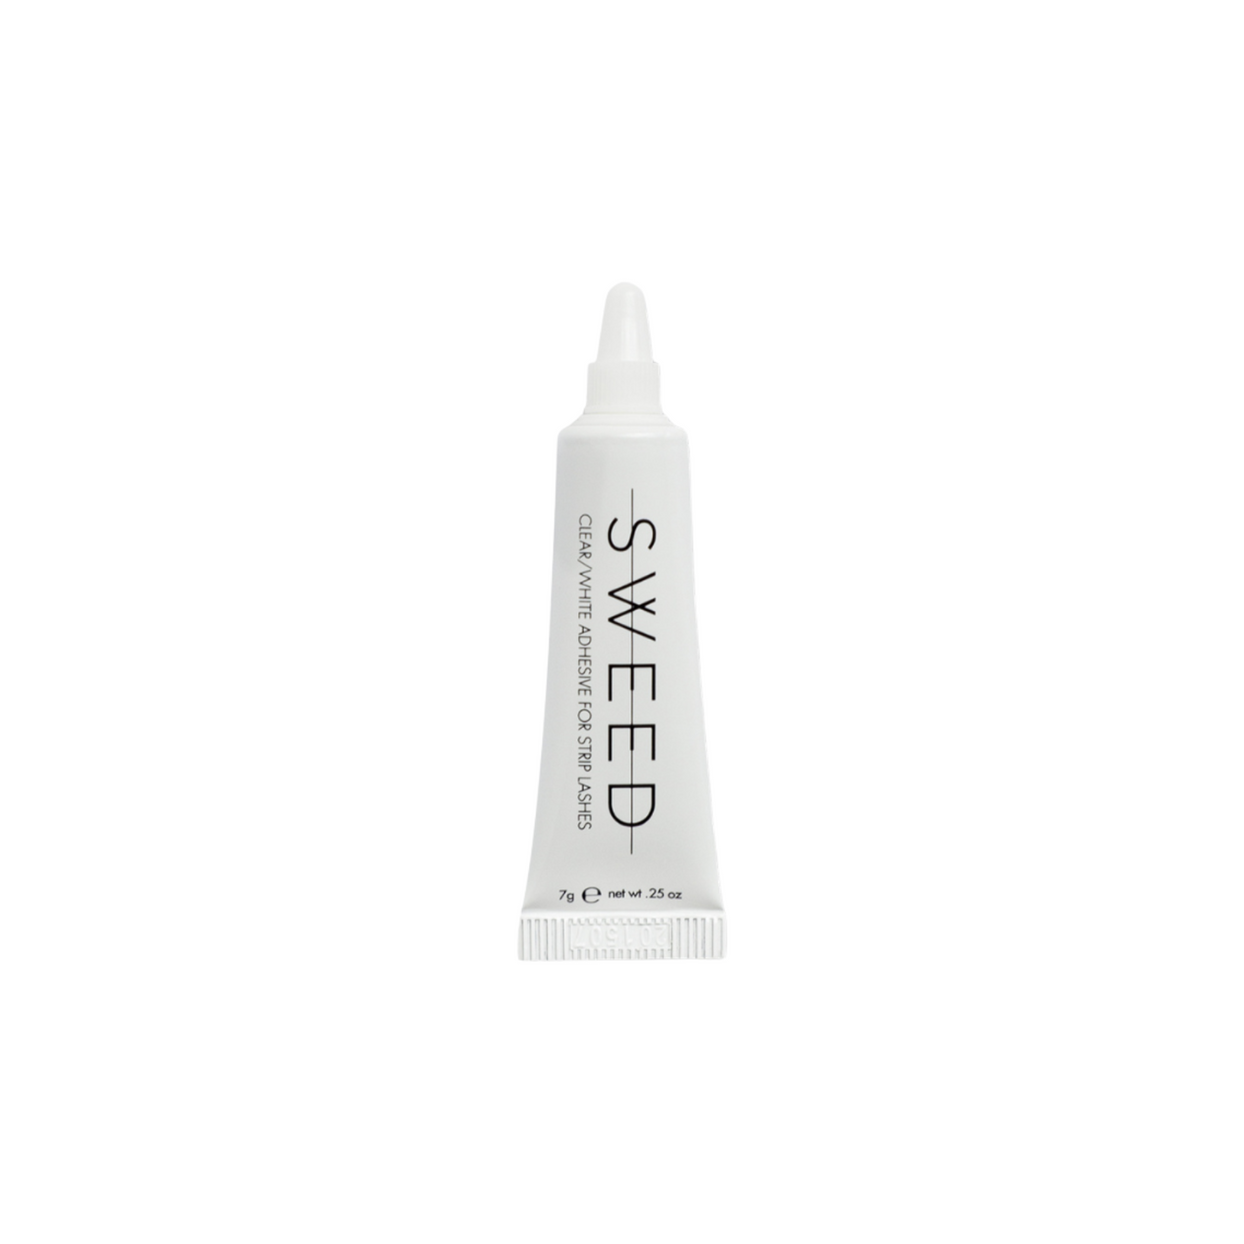 Adhesive for Strip Lashes: Clear/White